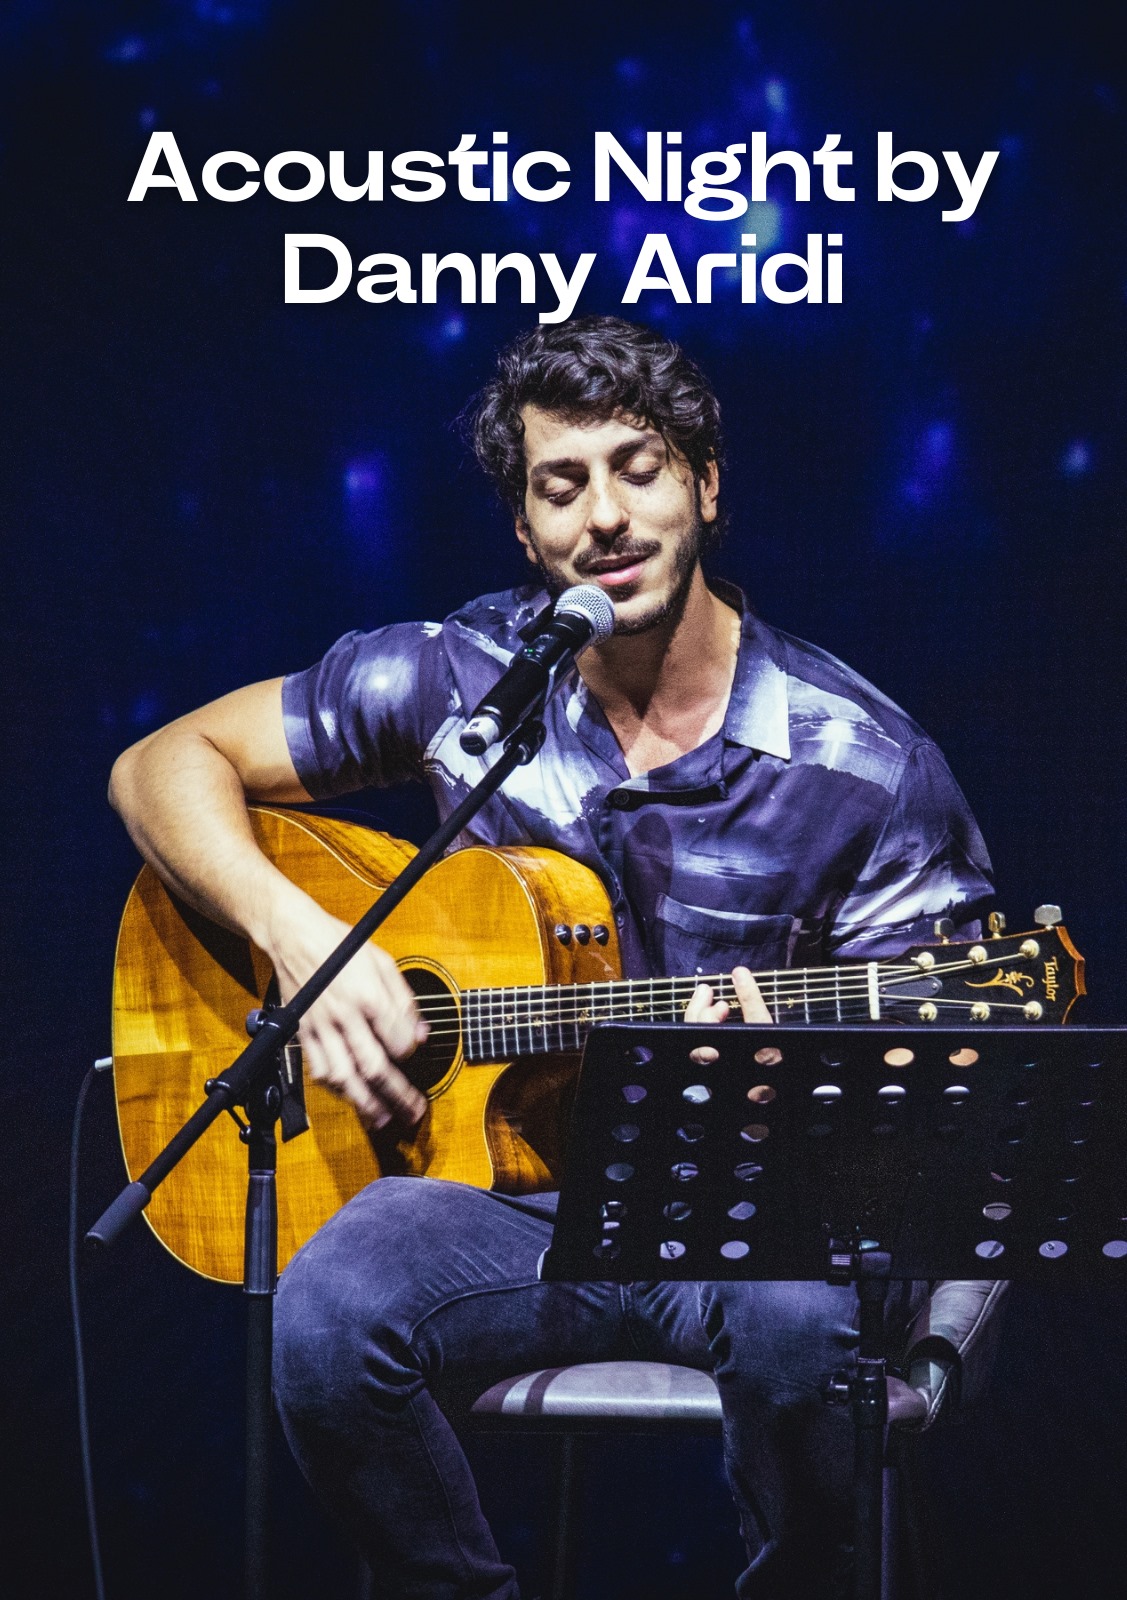 Acoustic Night by Danny AridiBest love songs of all time at unplugged & atmospheric music night.